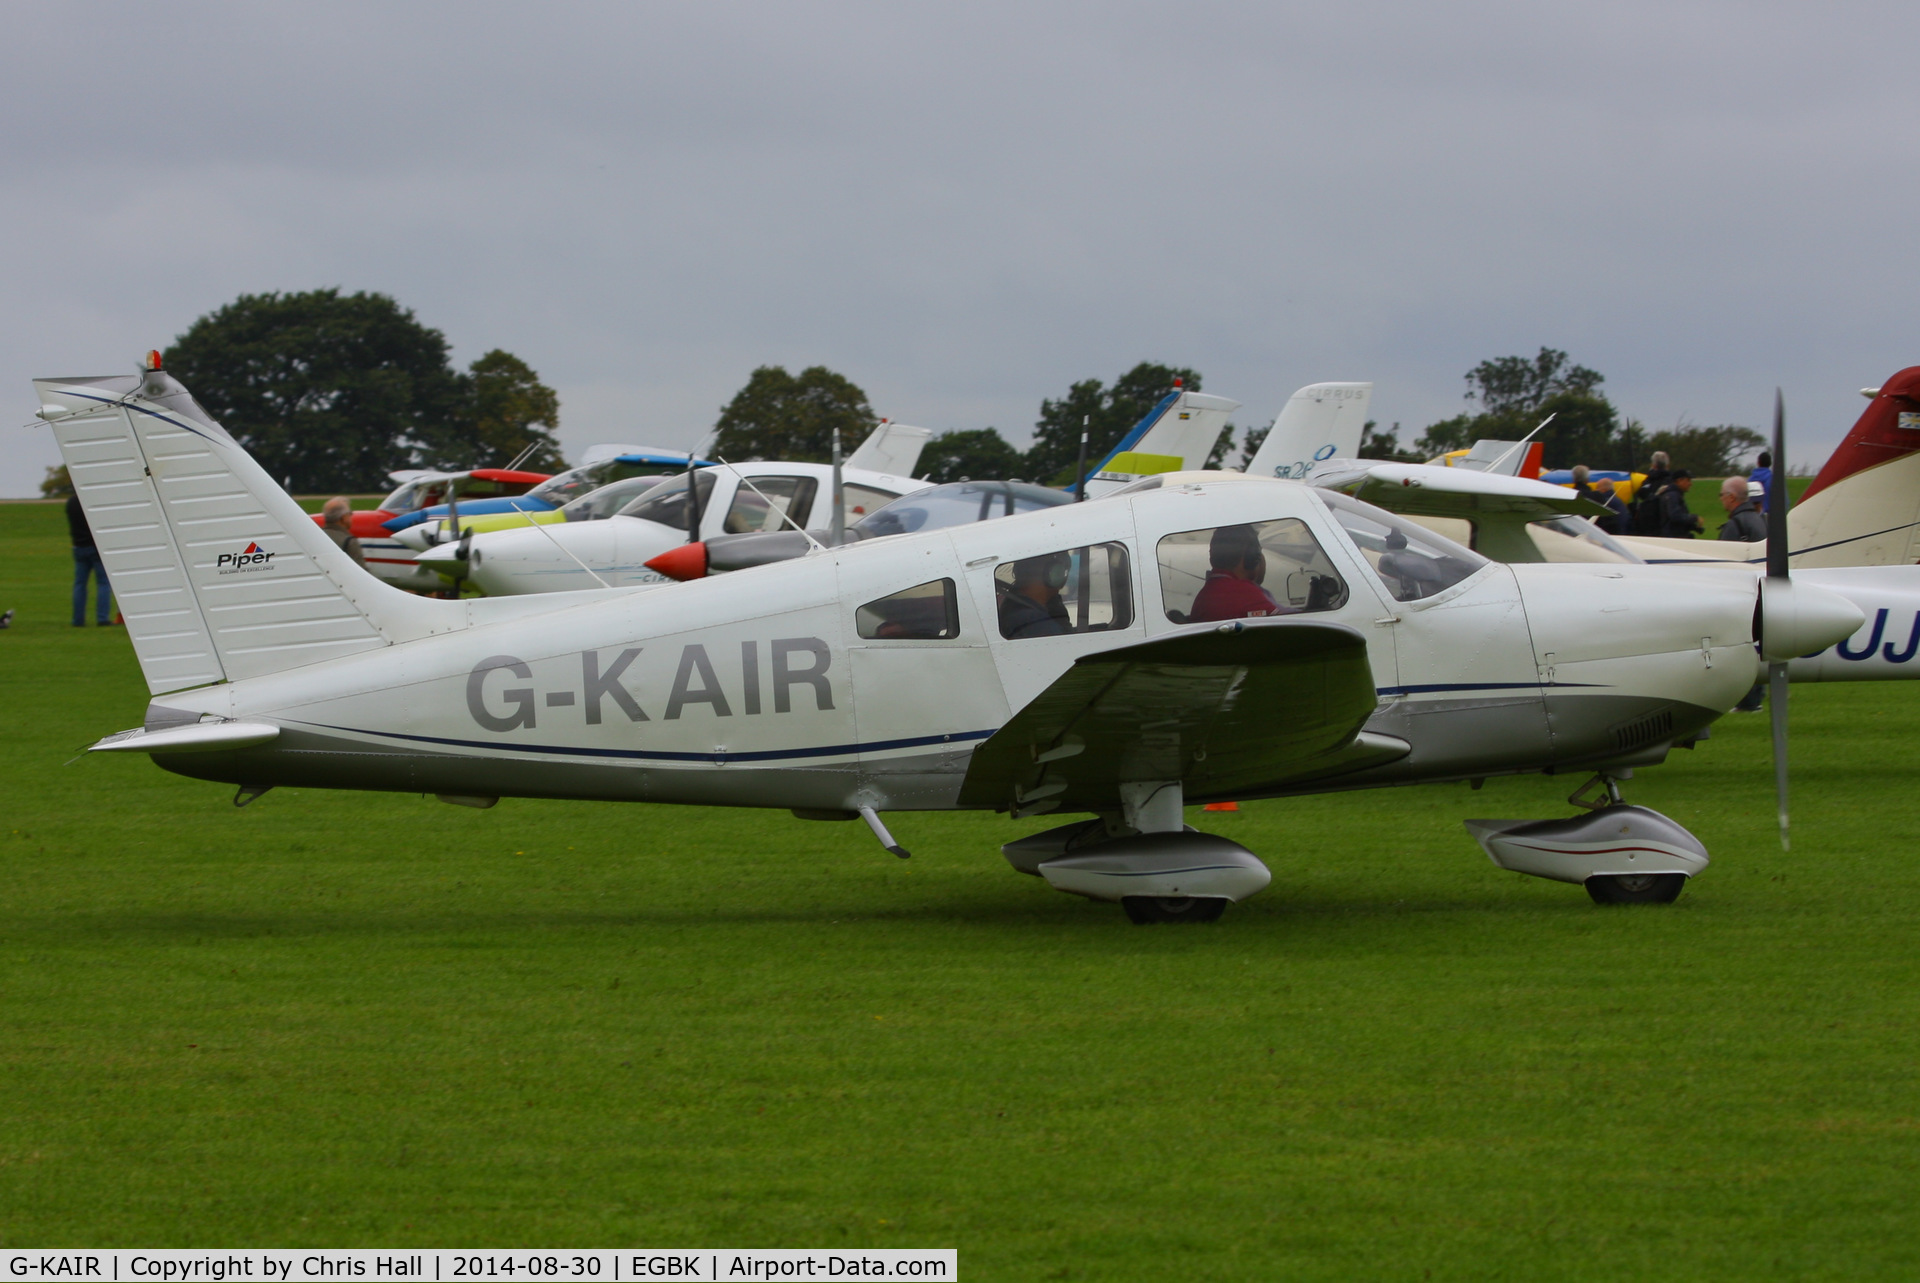 G-KAIR, 1978 Piper PA-28-181 Cherokee Archer II C/N 28-7990176, at the LAA Rally 2014, Sywell